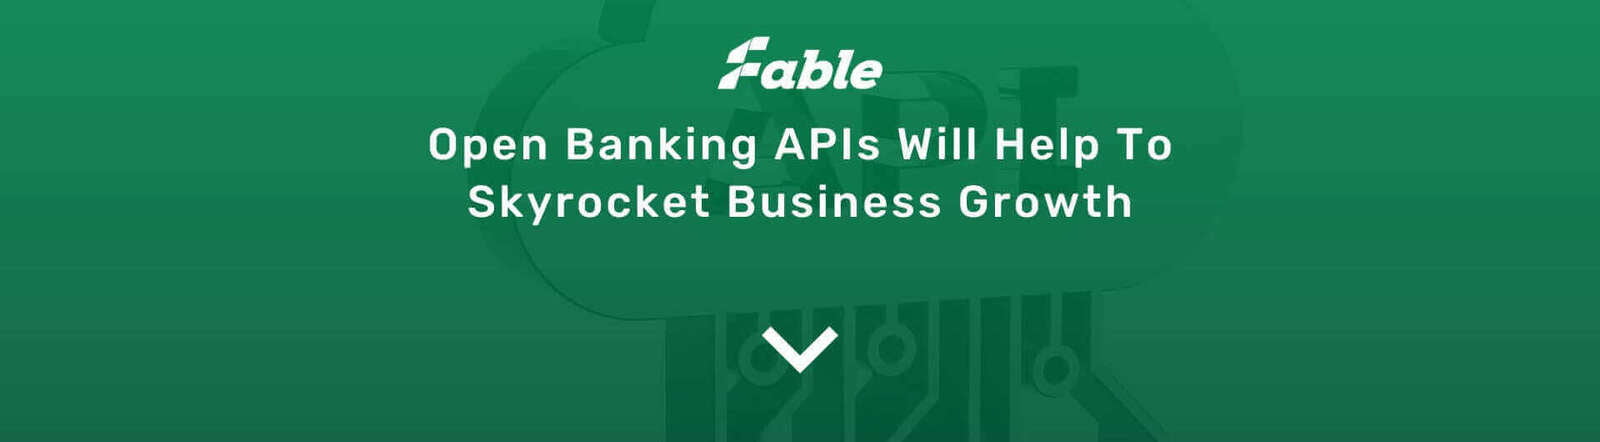 Open Banking APIs Will Help To Skyrocket Business Growth